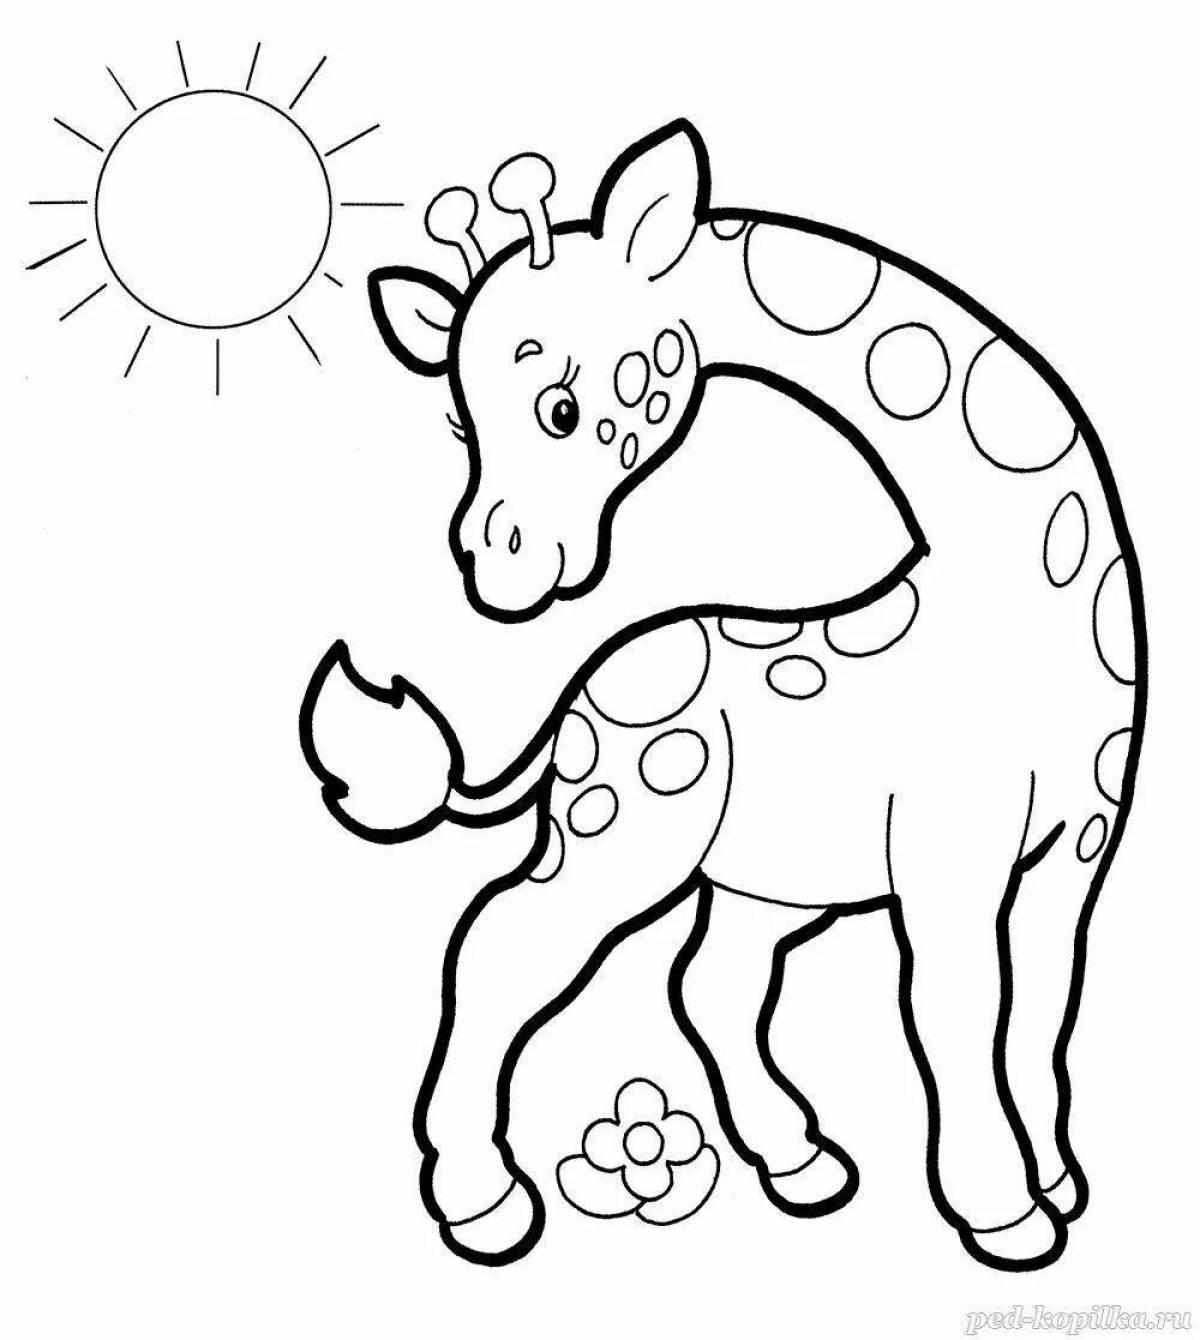 Cute giraffe coloring book for 4-5 year olds